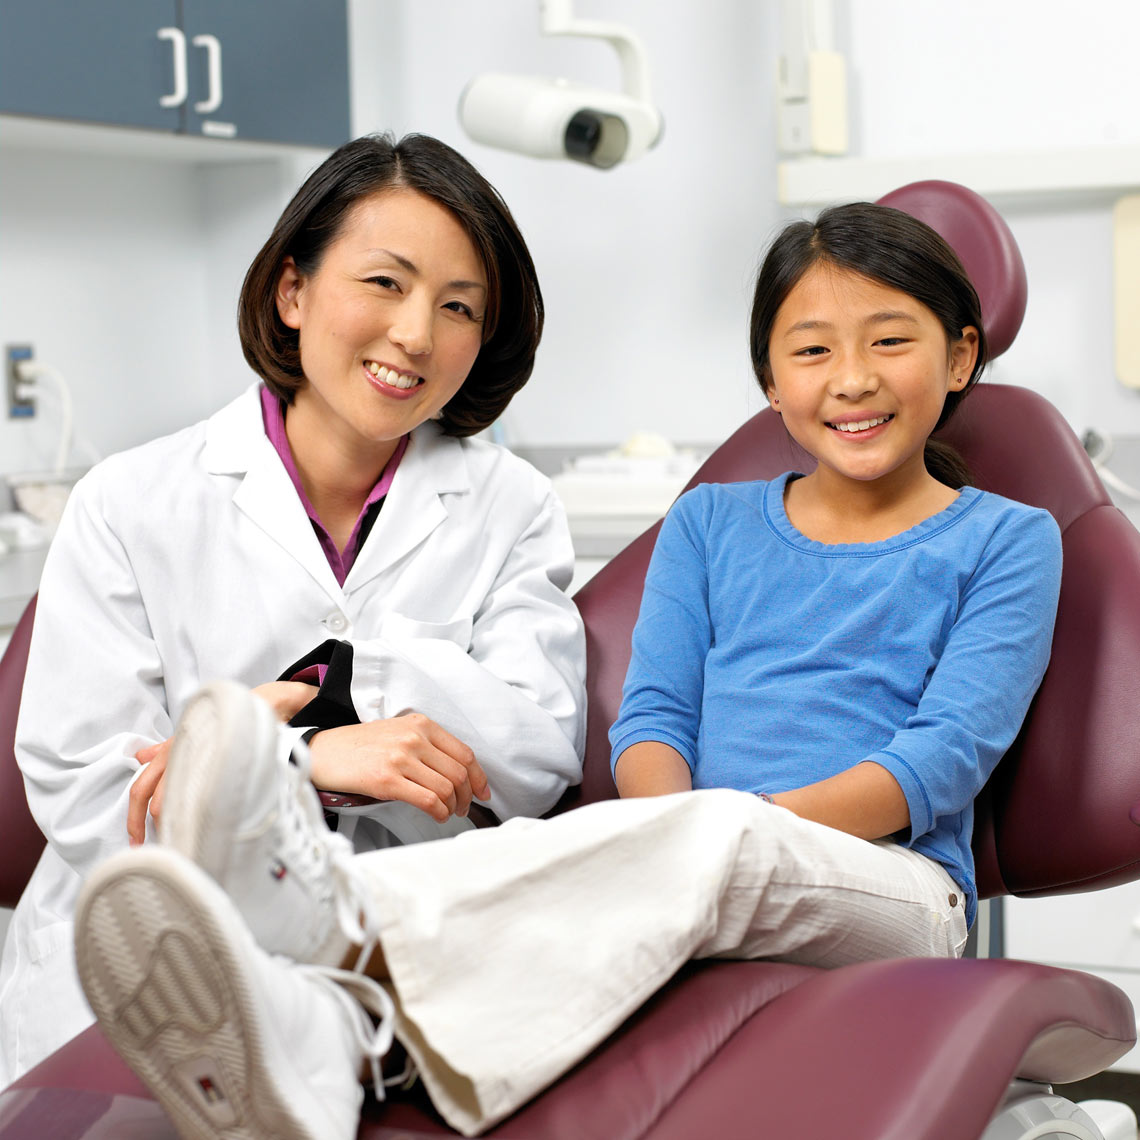 3M-dental/dentist/young girl patient in chair/medical photography